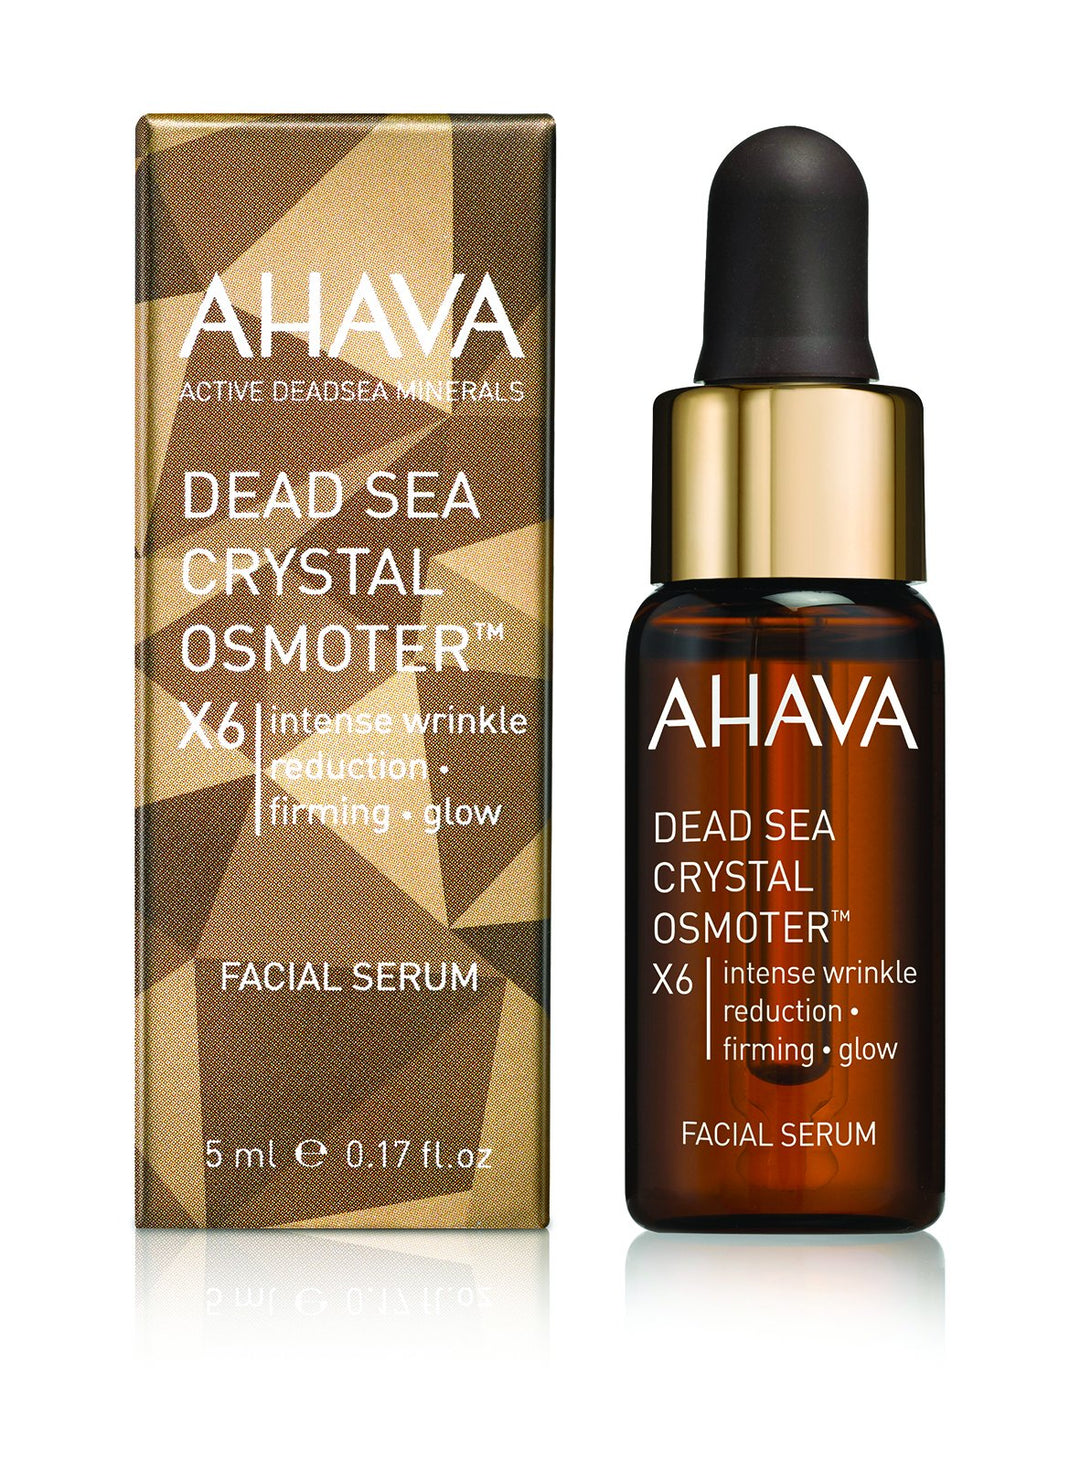 Ahava Crystal Osmoter facial serum - SkinEffects Zwolle